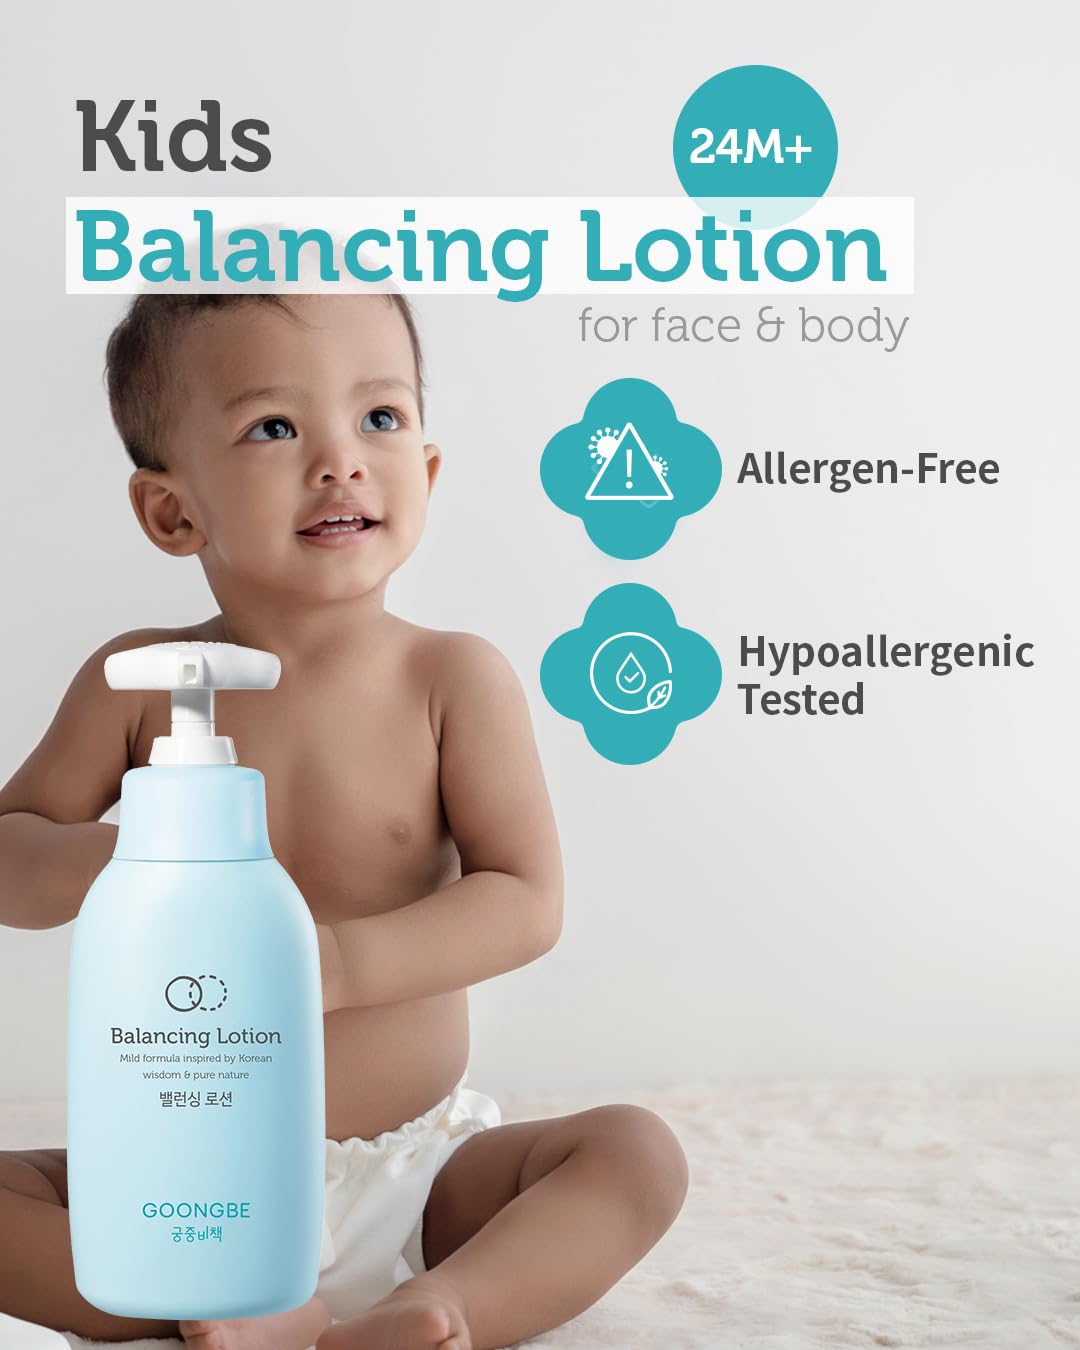 Child-friendly 250ml GOONGBE Balancing Lotion, formulated to provide gentle care for kids' skin.